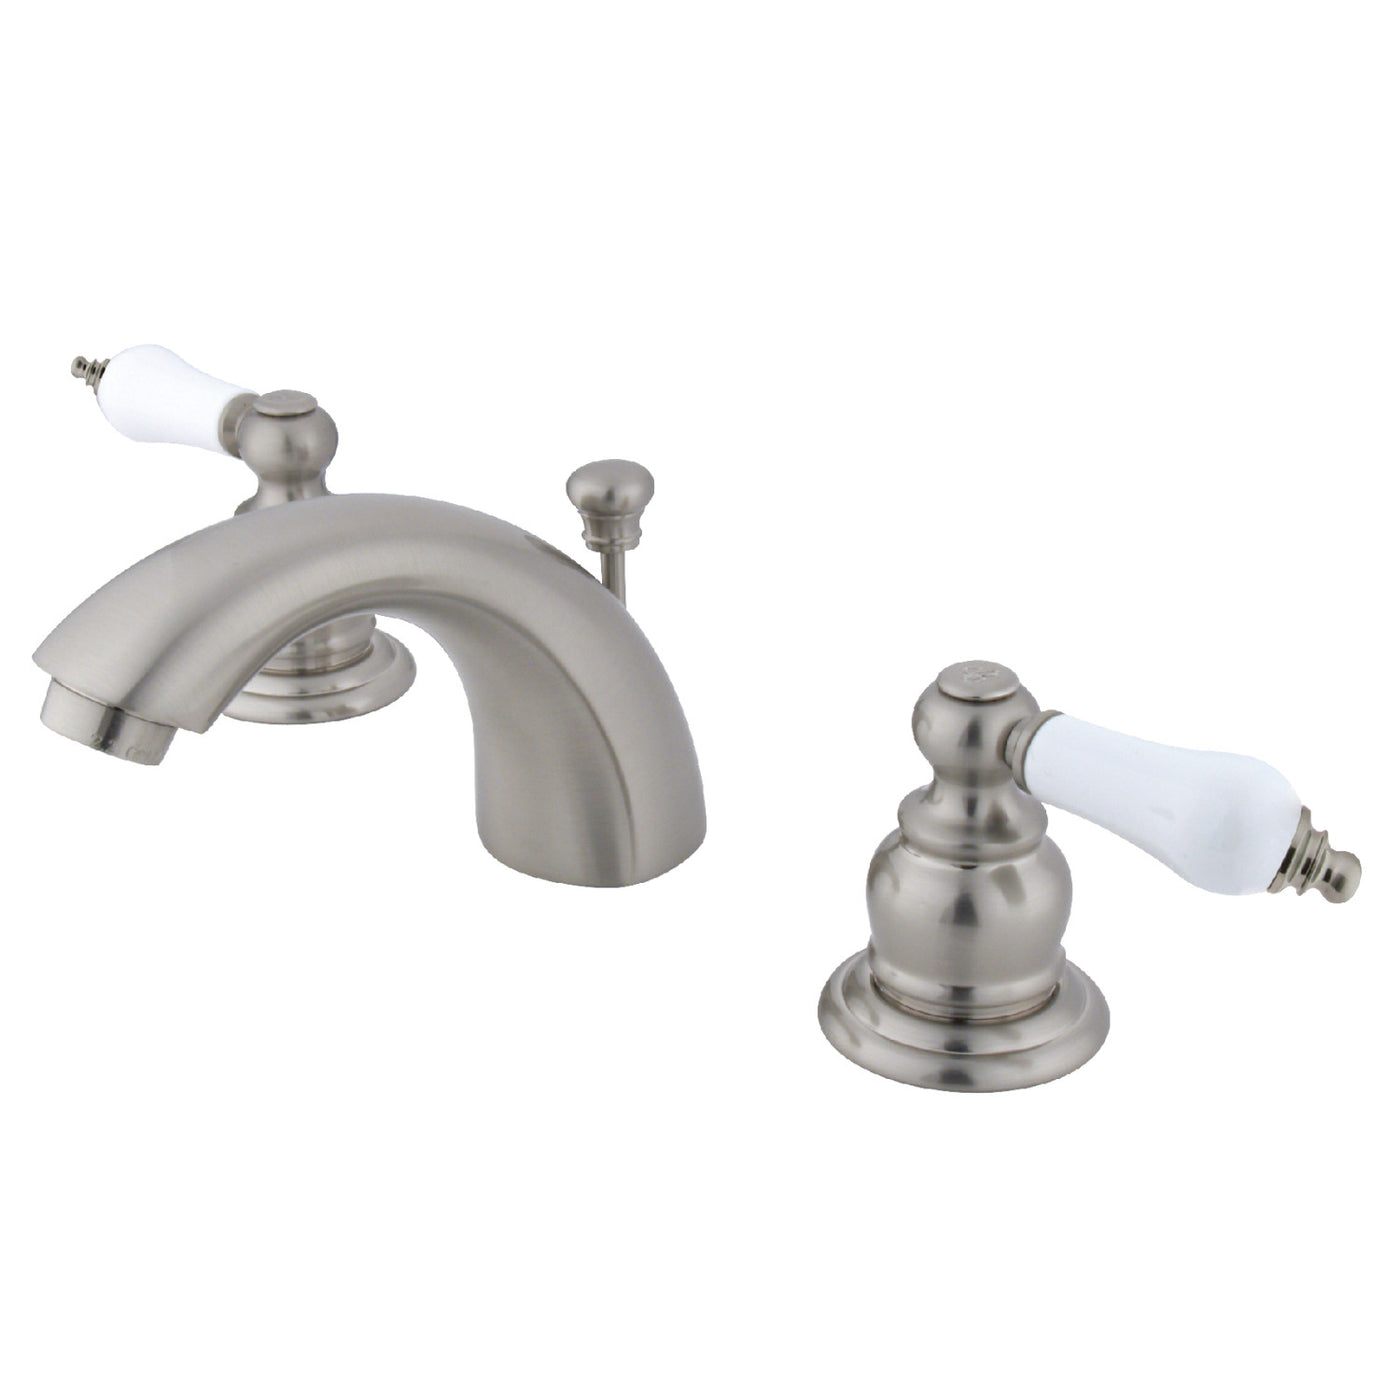 Elements of Design EB948B Mini-Widespread Bathroom Faucet with Retail Pop-Up, Brushed Nickel